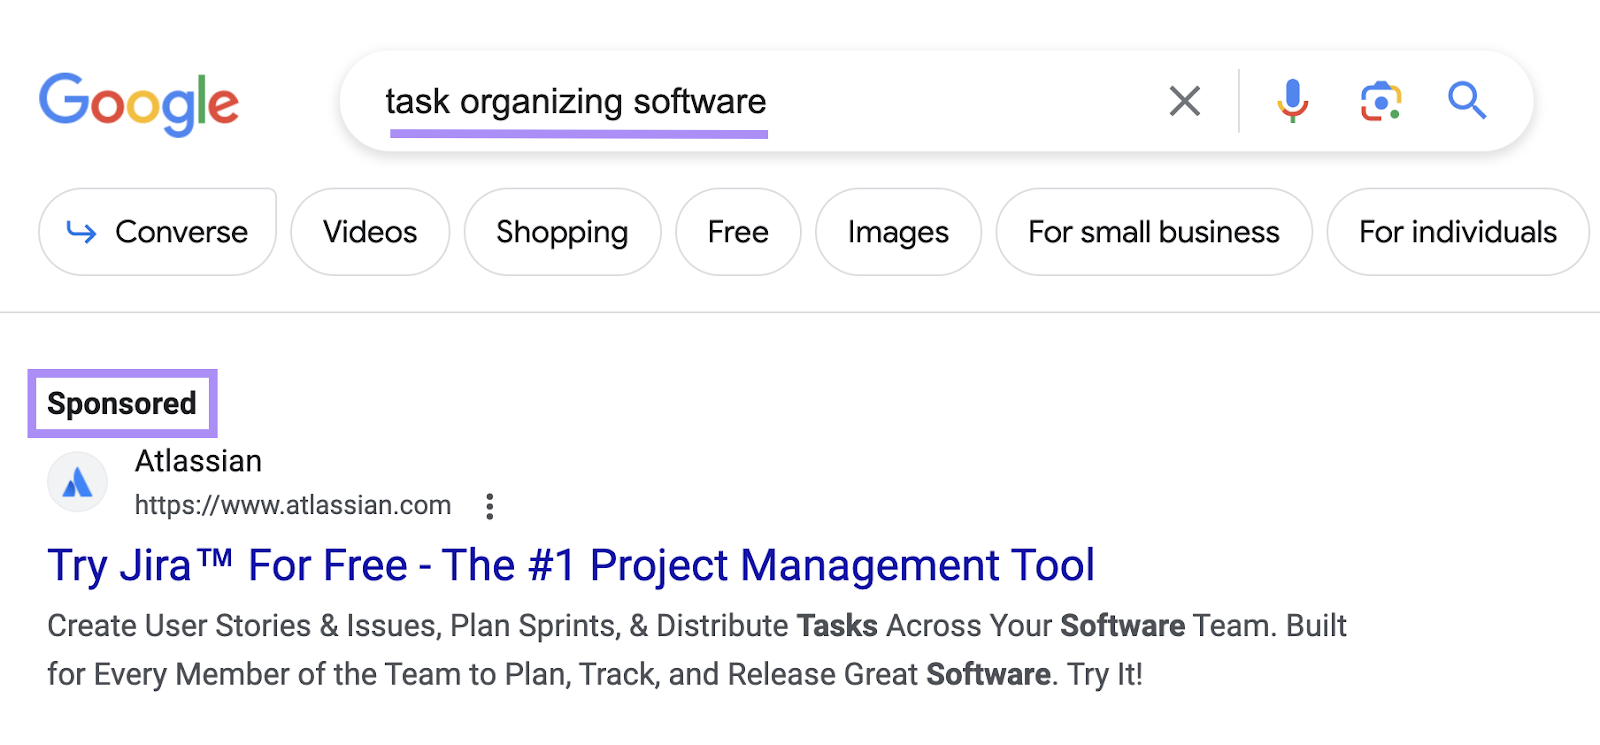 A PPC ad on Google for the term "task organizing software"